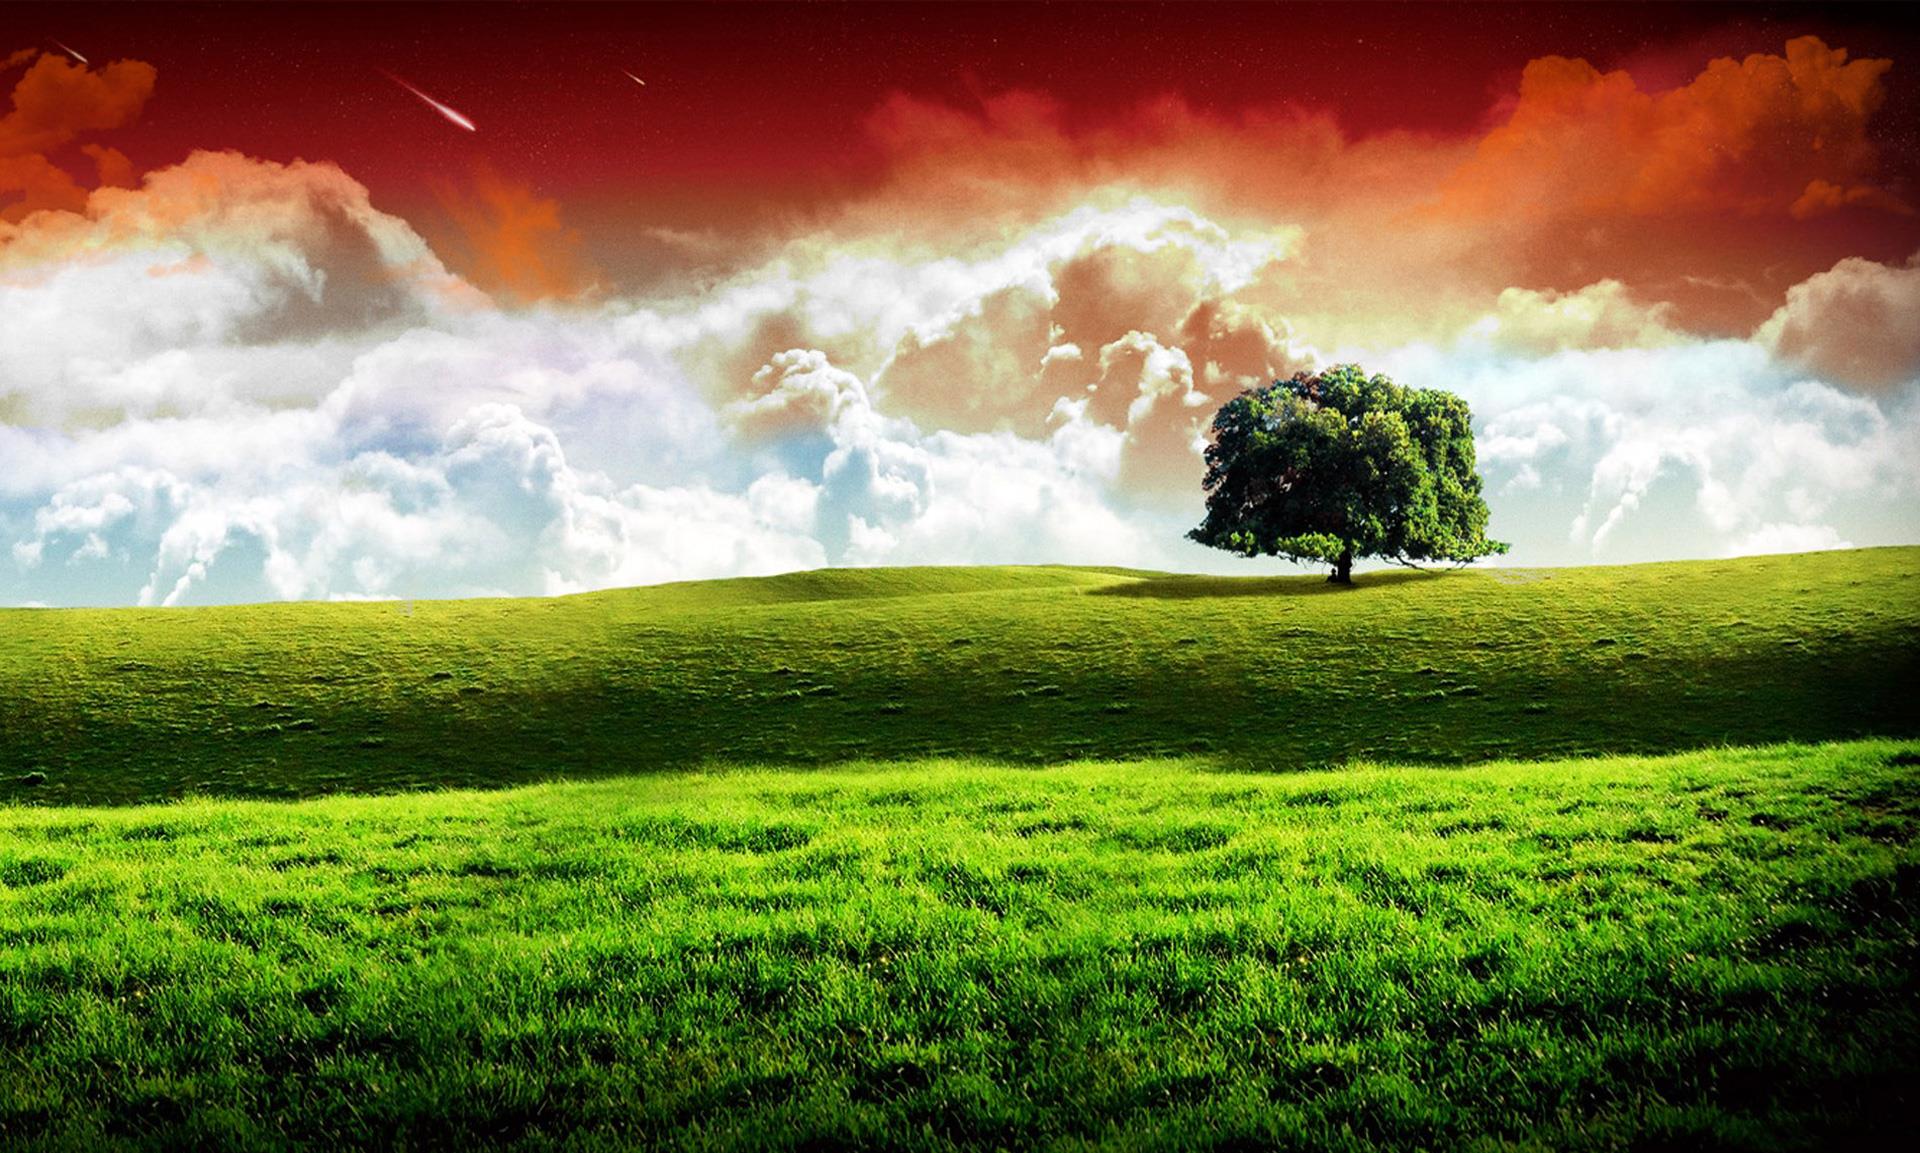 india independence day hd wallpapers,natural landscape,nature,grassland,sky,green